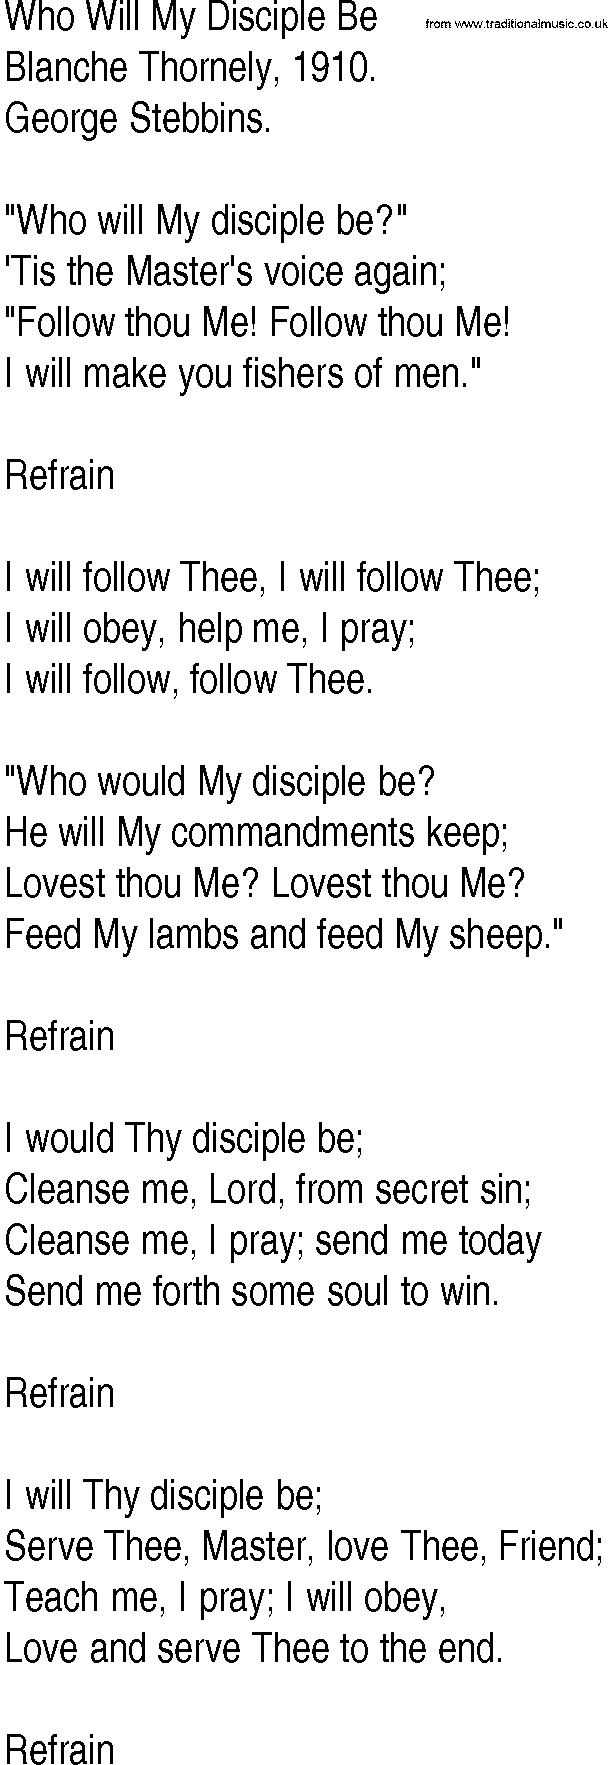 Hymn and Gospel Song: Who Will My Disciple Be by Blanche Thornely lyrics